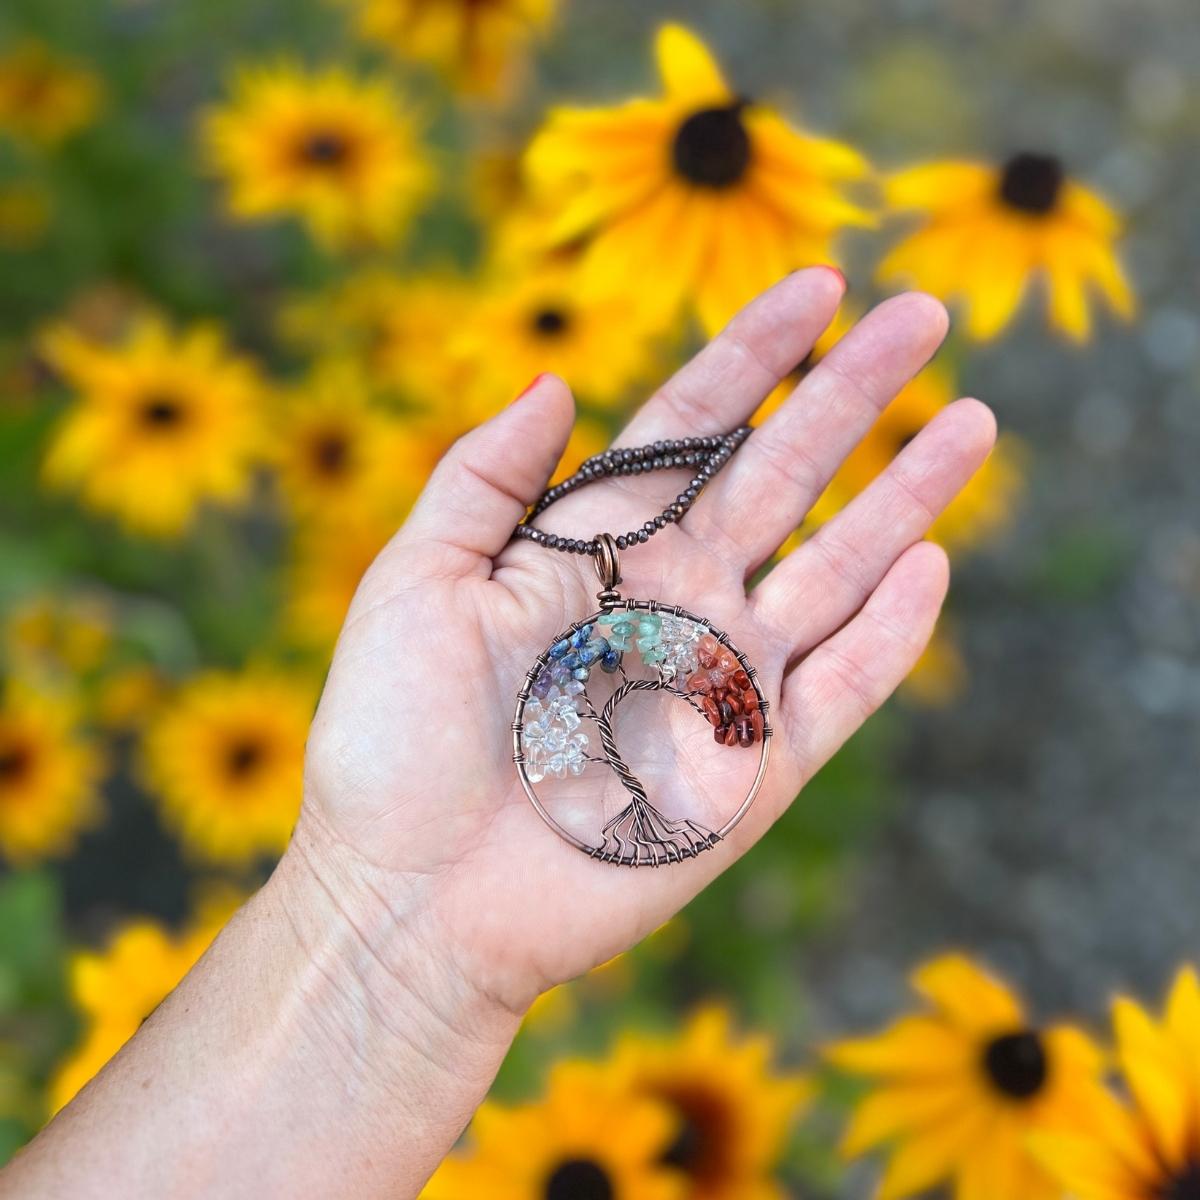 "Chakra Harmony Tree" is a captivating and spiritually meaningful necklace that celebrates the balance and alignment of the body's energy centers, known as the chakras.